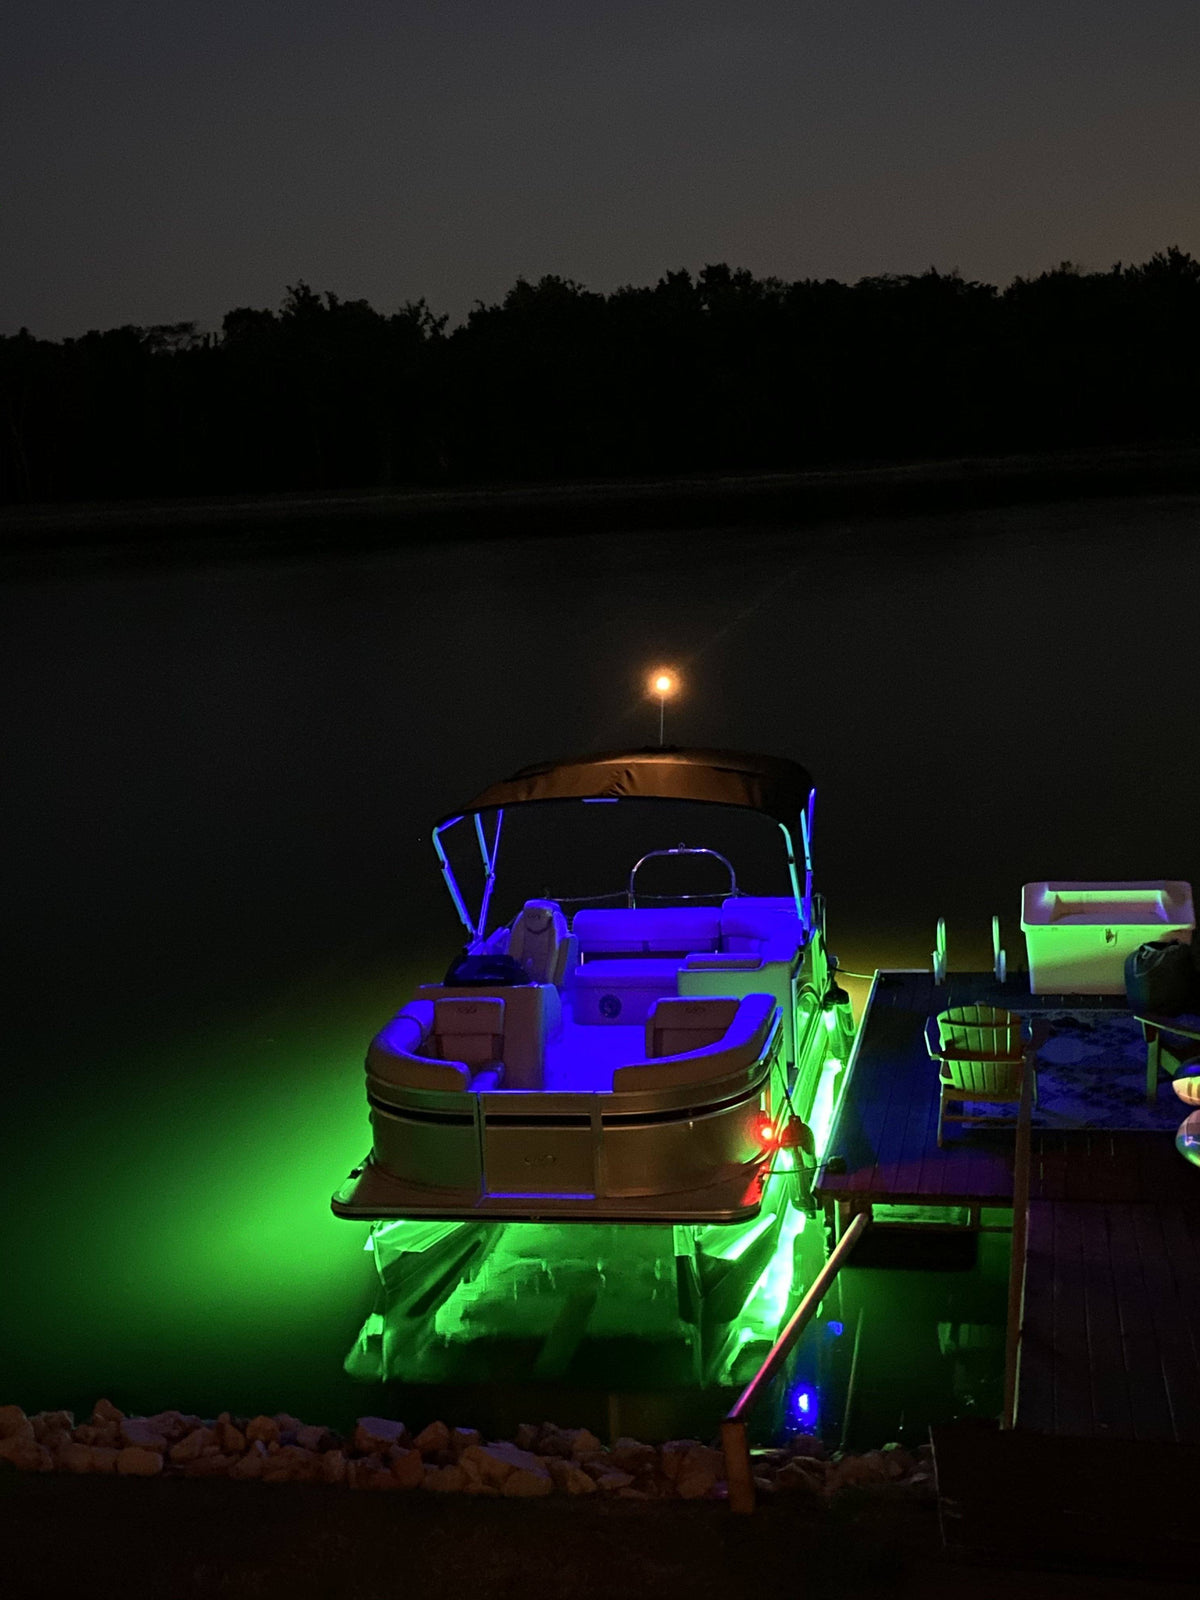 Green Blob Underwater Fishing Light for Docks 7500 Lumen, 110 volts with 30ft Cord Fishing Lights Green Blob Outdoors 